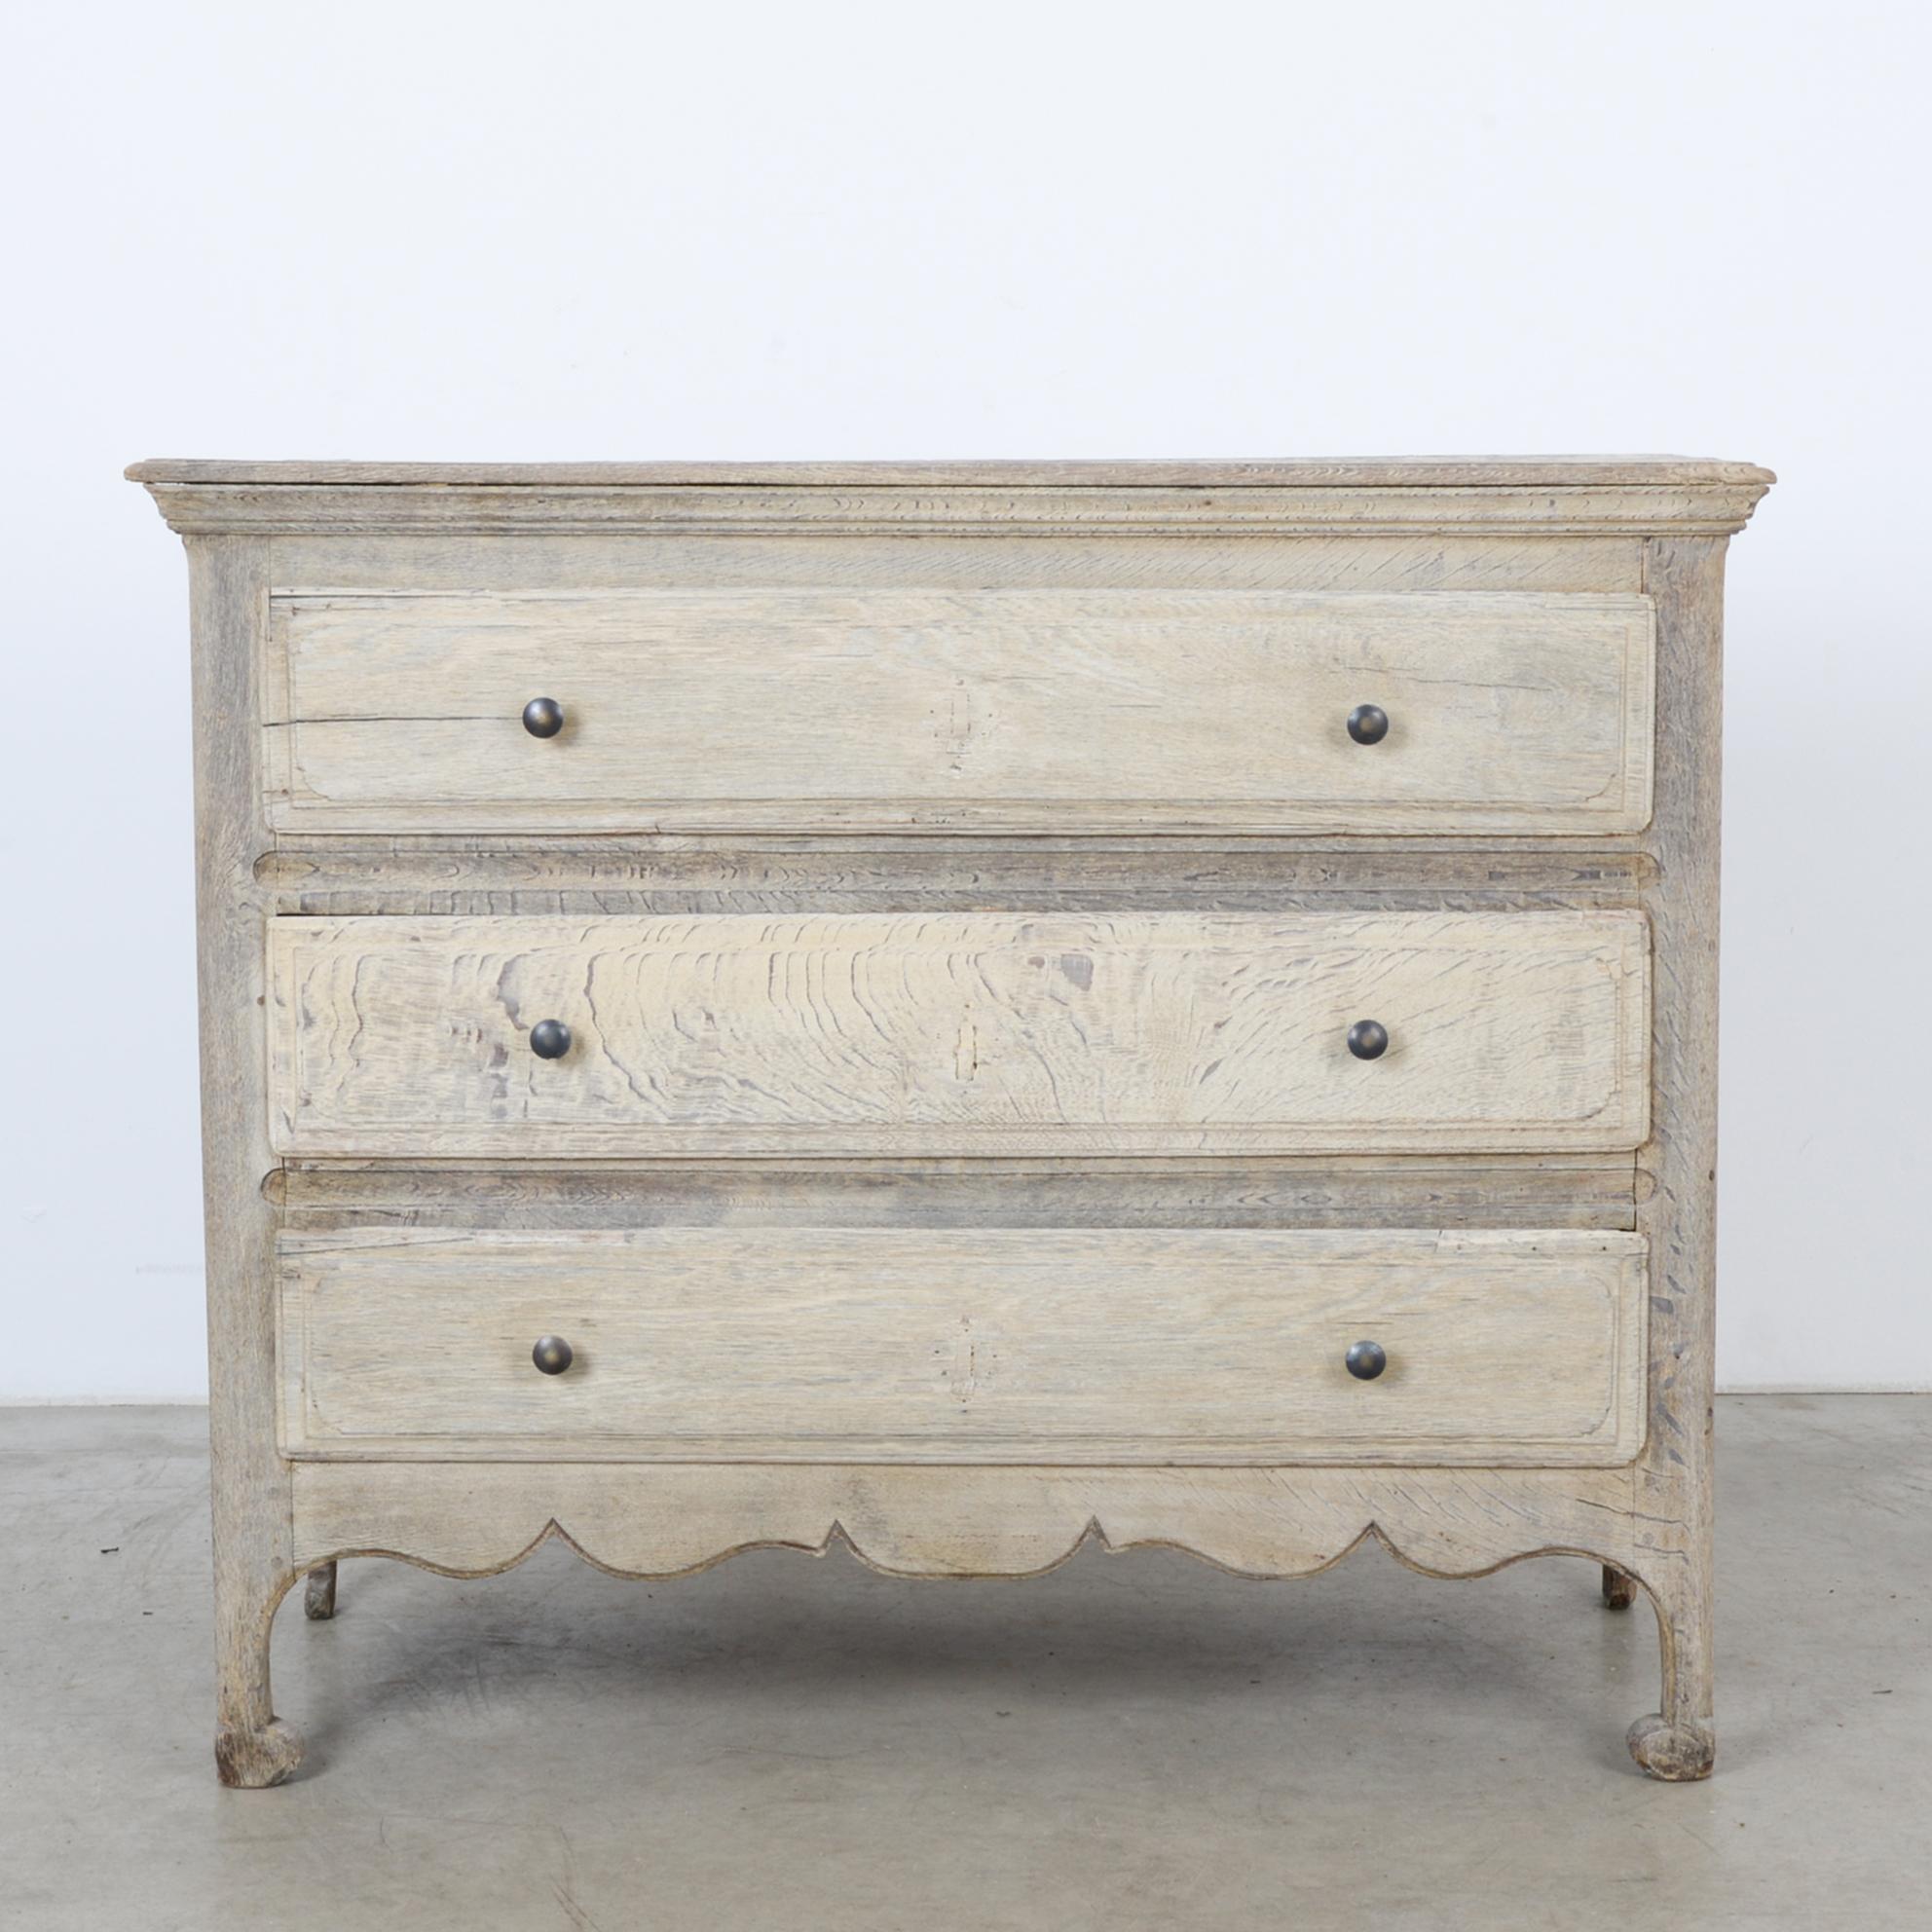 This bleached oak chest of drawers was made in France, circa 1880. It houses three drawers, each with two circular pulls. Four legs with rounded feet elevate the chest, which features a scalloped apron. The finish shows off the distinctive wood